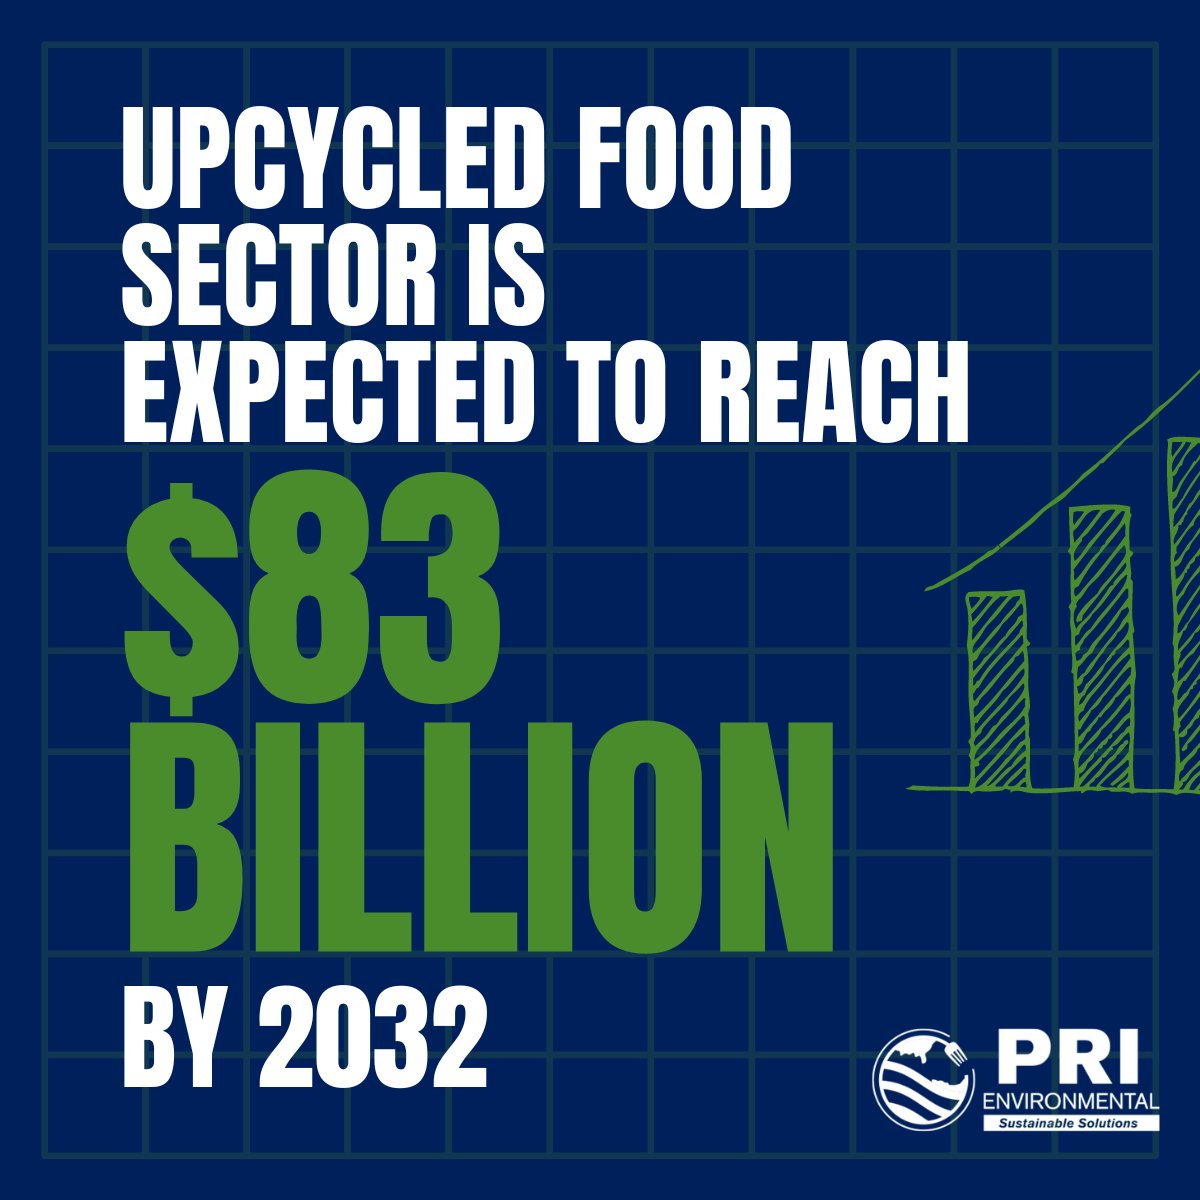 Explore the booming upcycled food sector, predicted to hit $83bn by 2032. Our blog highlights companies turning food loss into sustainable products. Learn how it benefits the planet, businesses, and consumers: vist.ly/34eem

---
#FoodRevolution #Sustainability